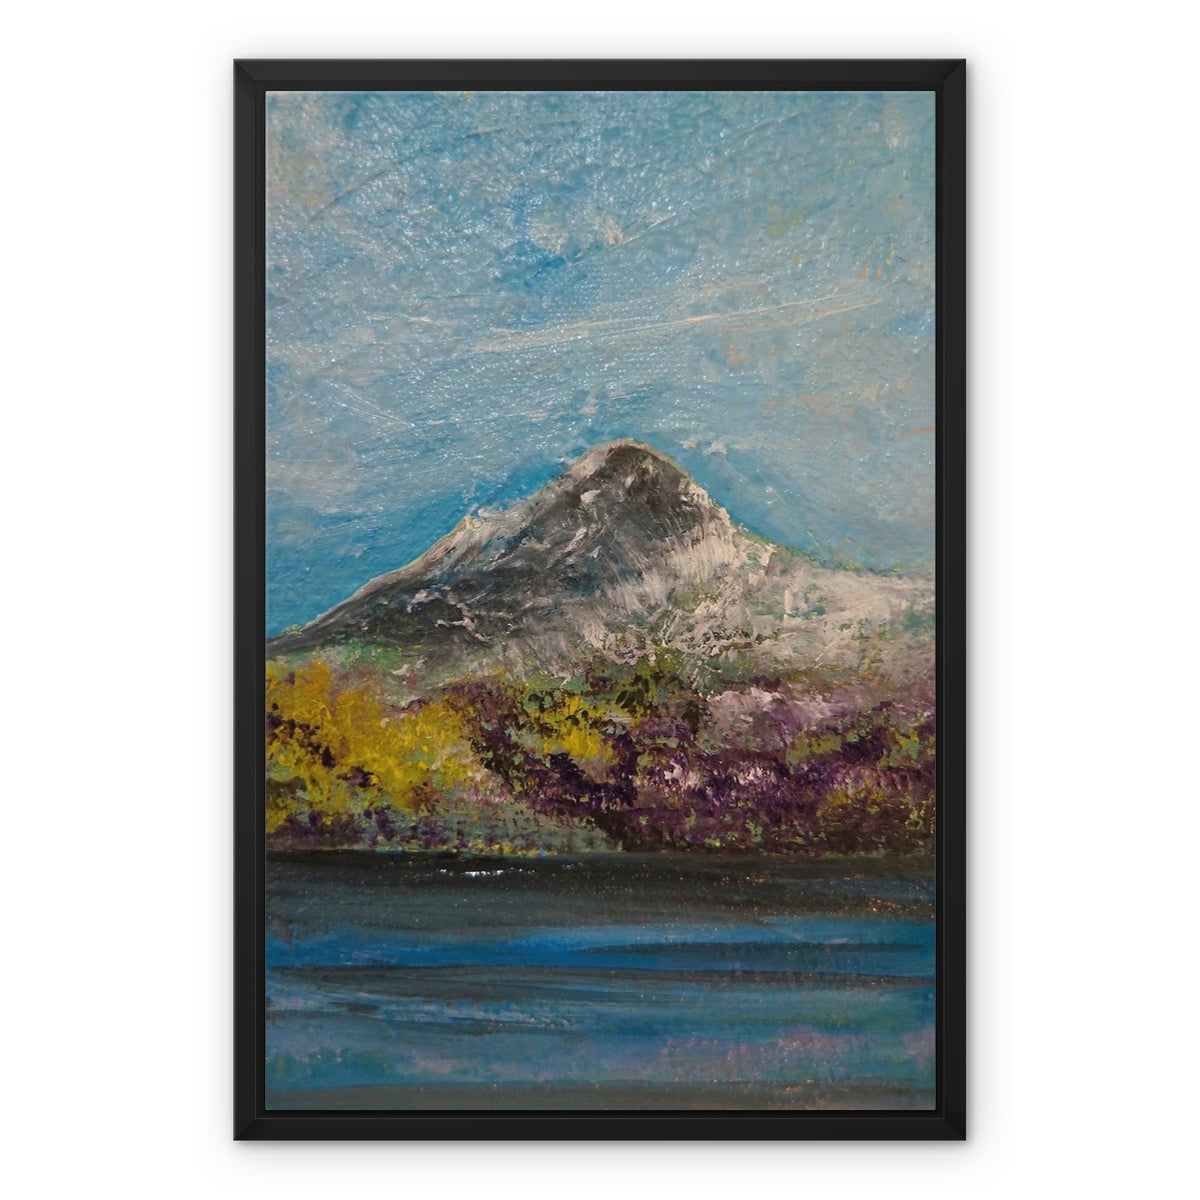 Ben Lomond ii Painting | Framed Canvas From Scotland-Floating Framed Canvas Prints-Scottish Lochs & Mountains Art Gallery-18"x24"-Black Frame-Paintings, Prints, Homeware, Art Gifts From Scotland By Scottish Artist Kevin Hunter